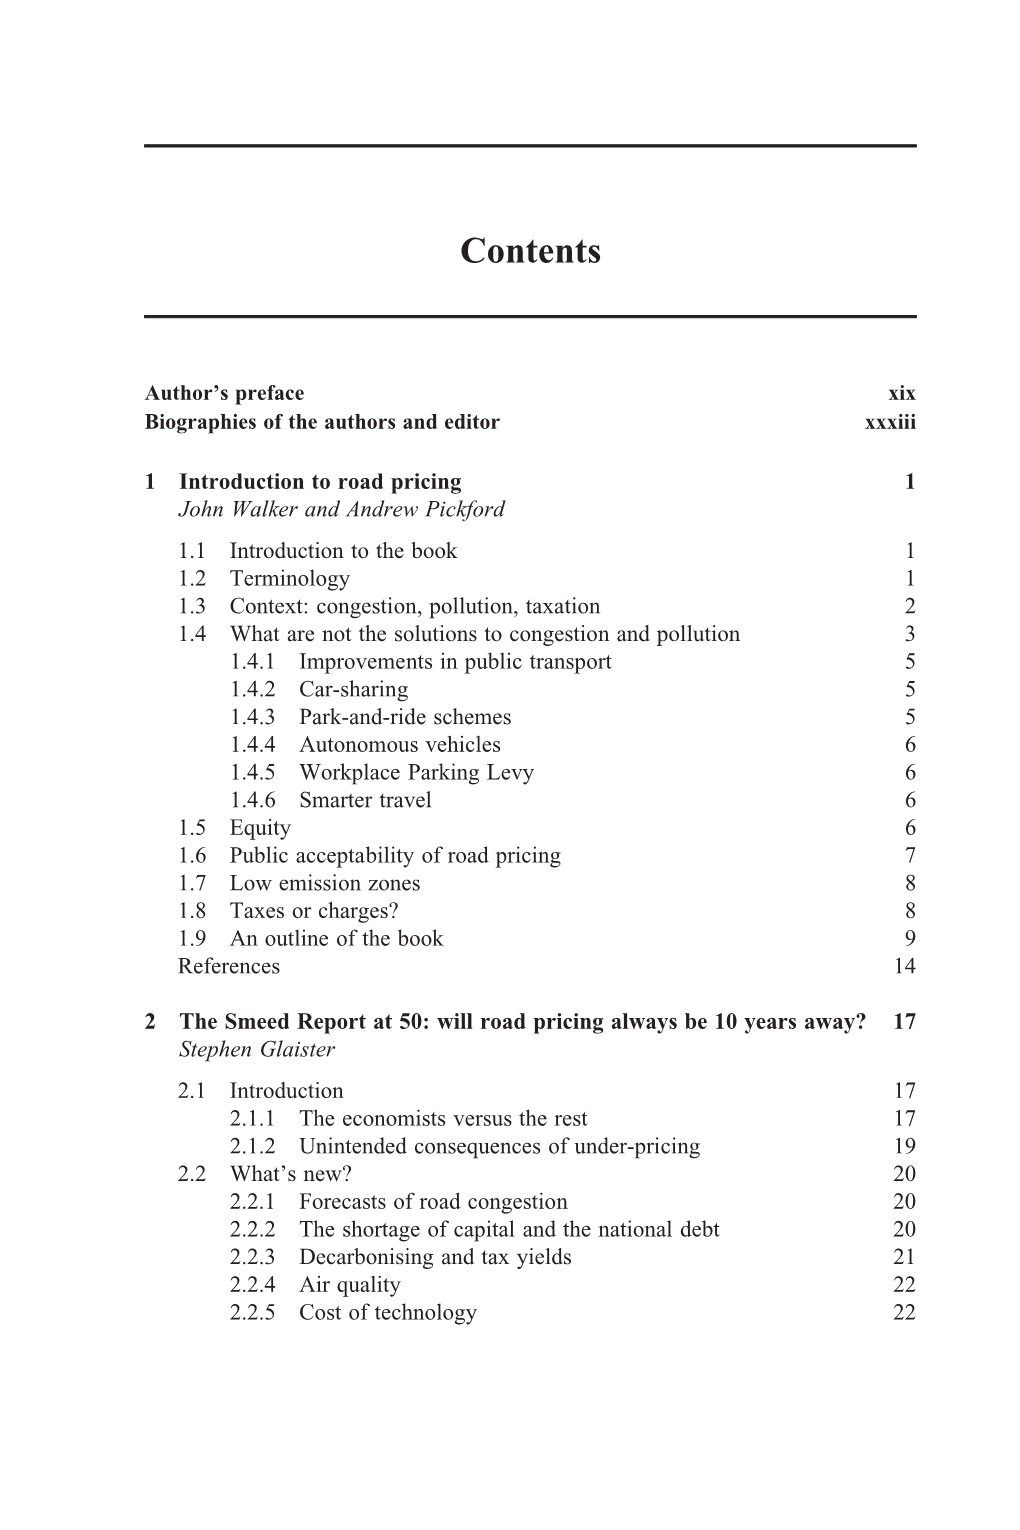 Download the Table of Contents Here